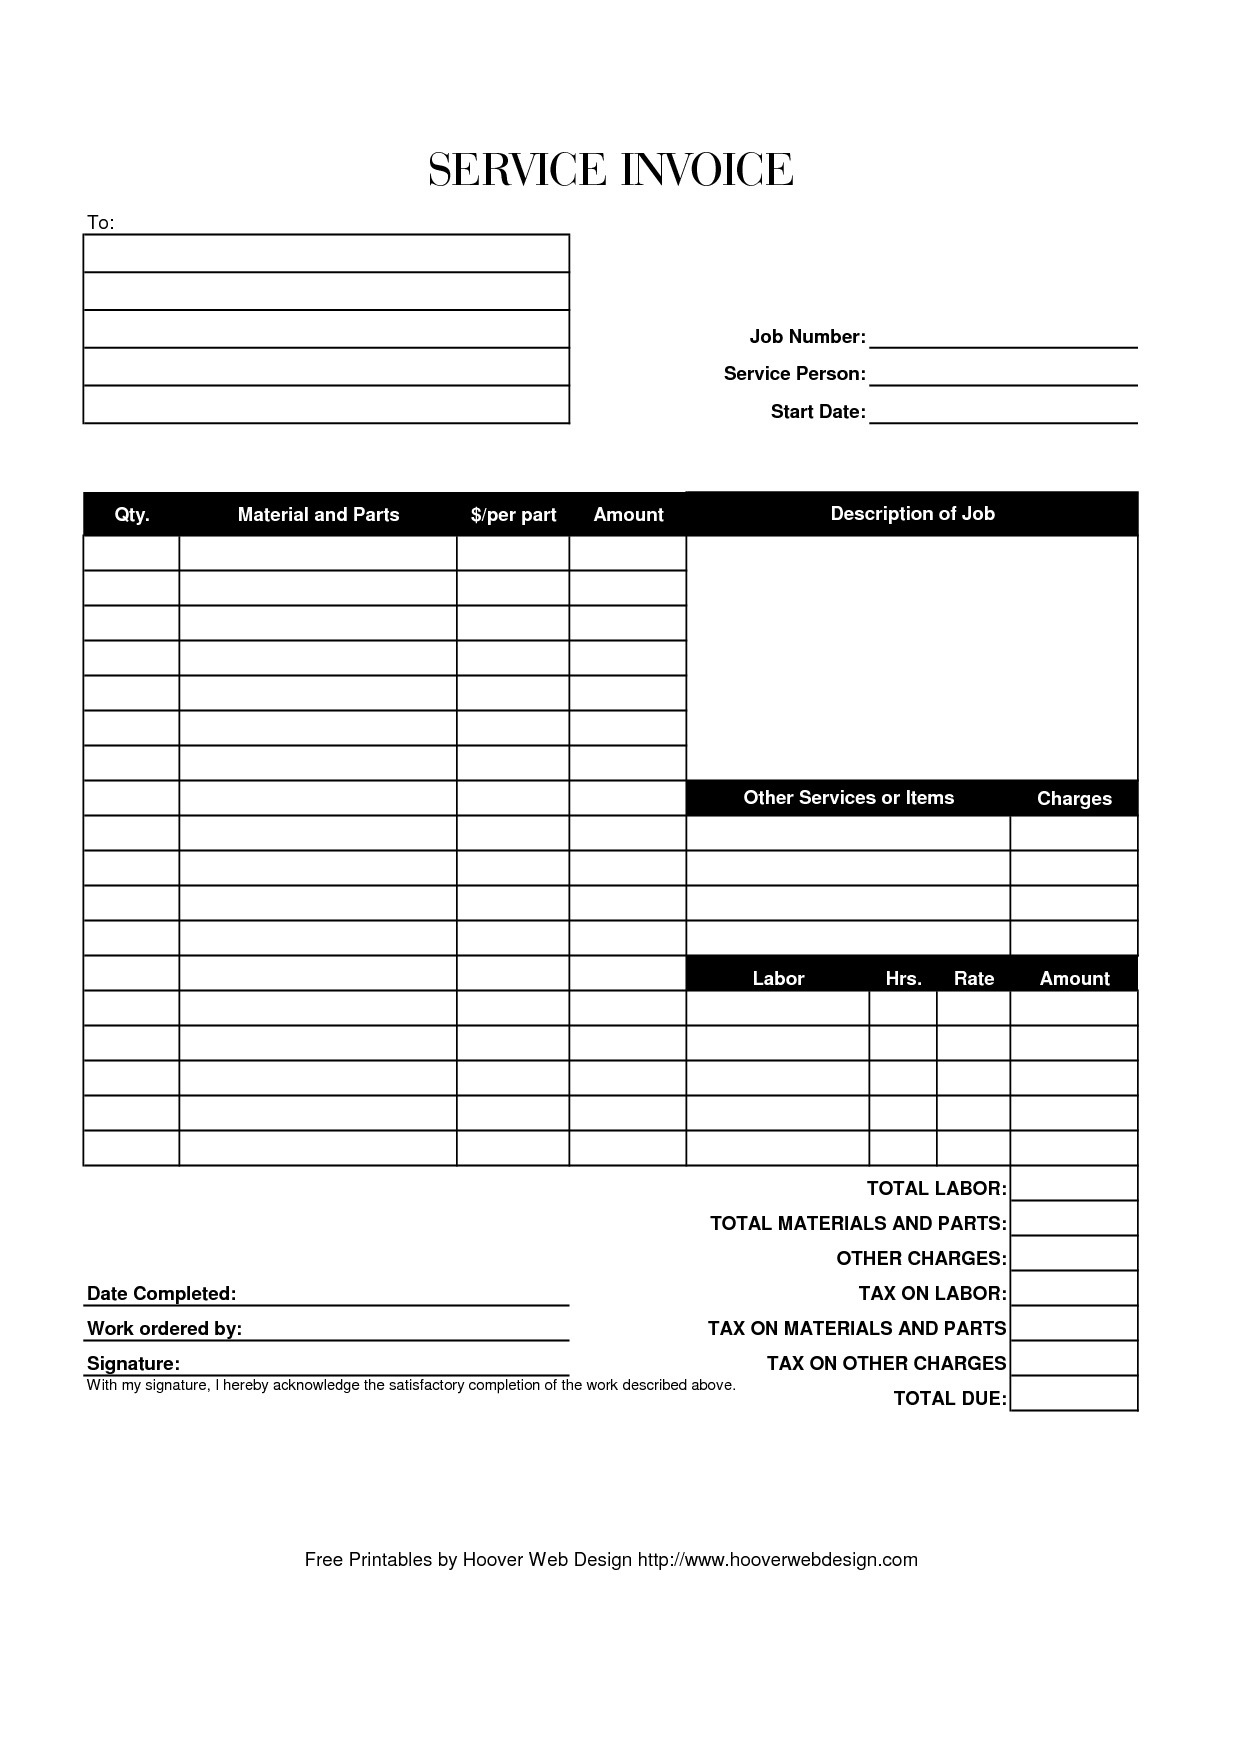 Hoover Receipts | Free Printable Service Invoice Template - Pdf - Free Printable Receipts